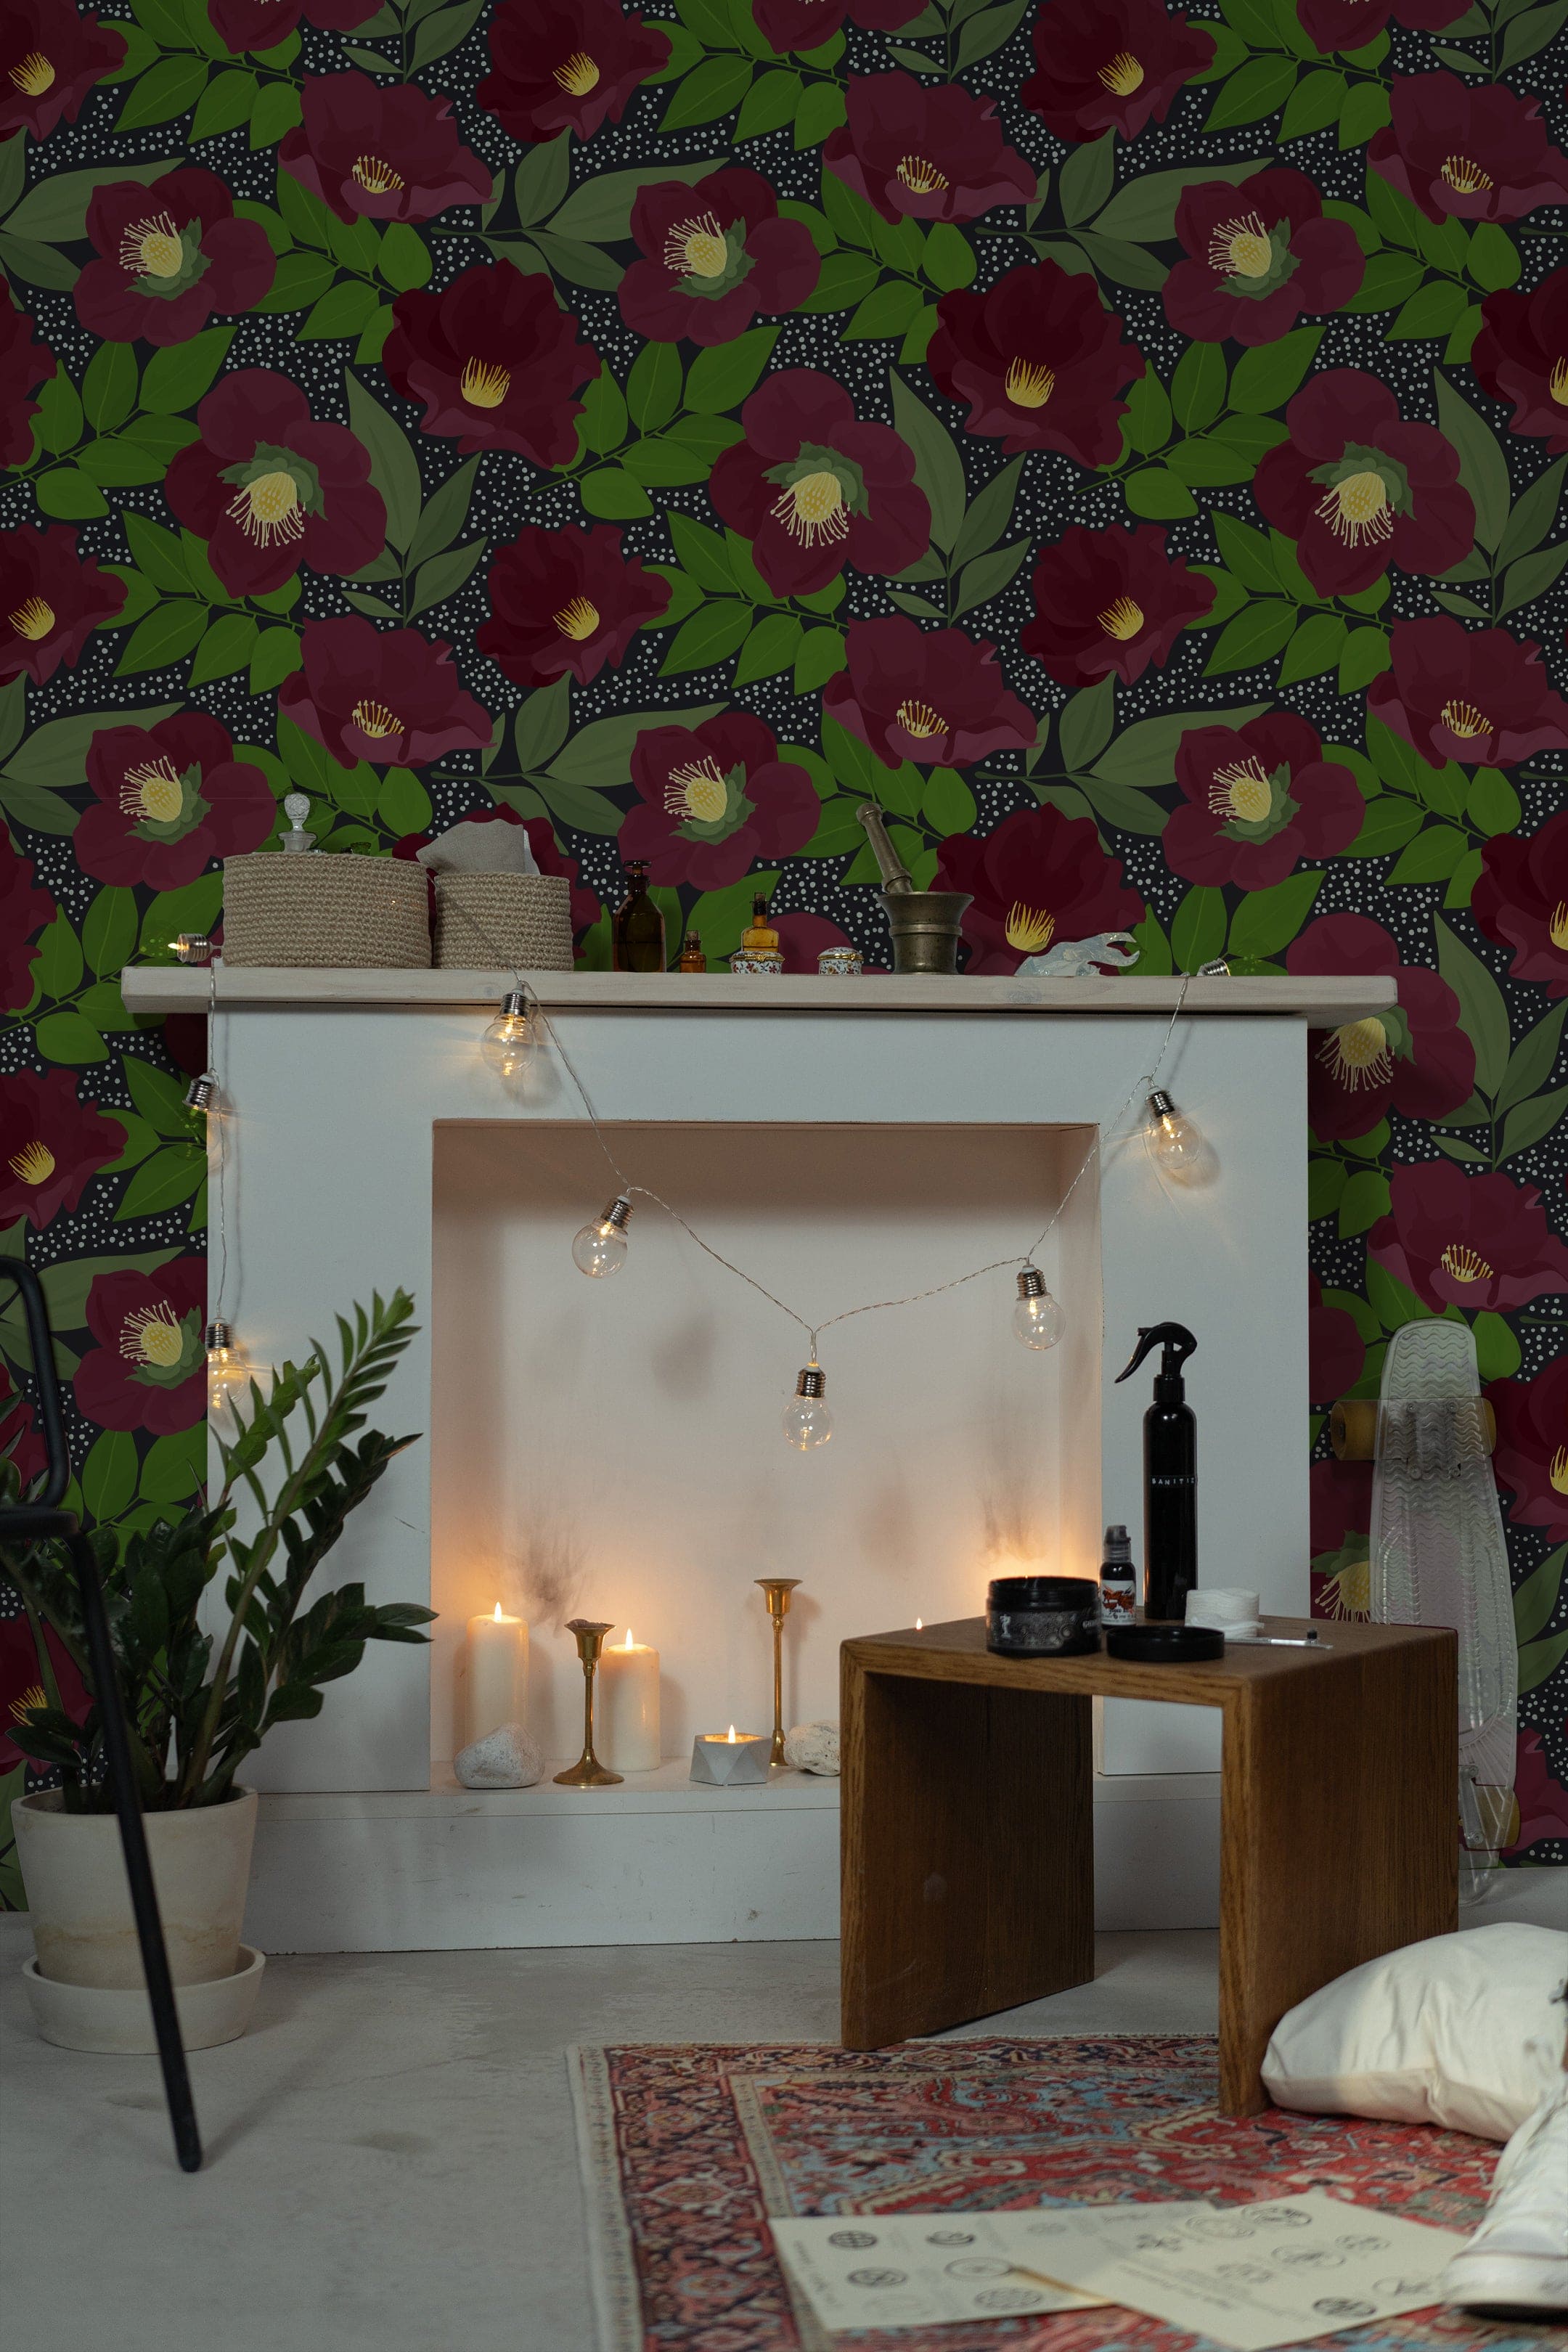 A cozy living space enhanced by the Merlot Floral Wallpaper, featuring large merlot-colored flowers with bright yellow centers, set against a dark background peppered with subtle polka dots. The room is warmly lit by string lights, creating a soothing atmosphere.